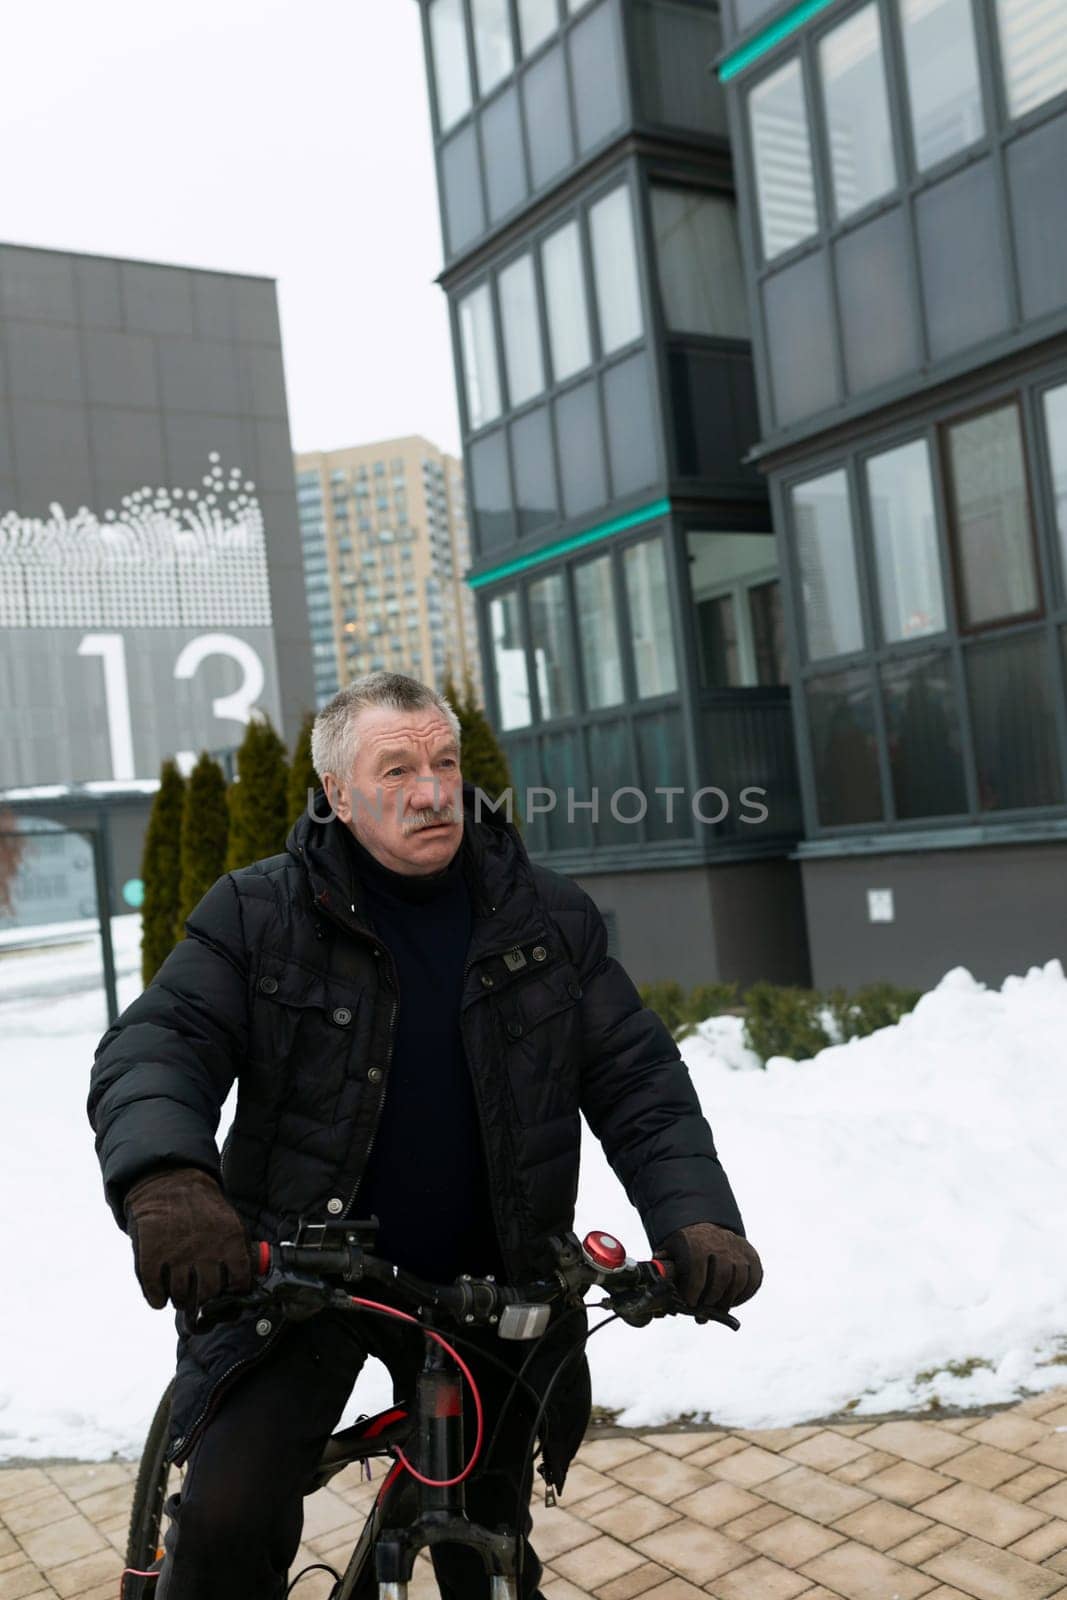 European elderly man leading a healthy lifestyle and riding a bicycle in winter.